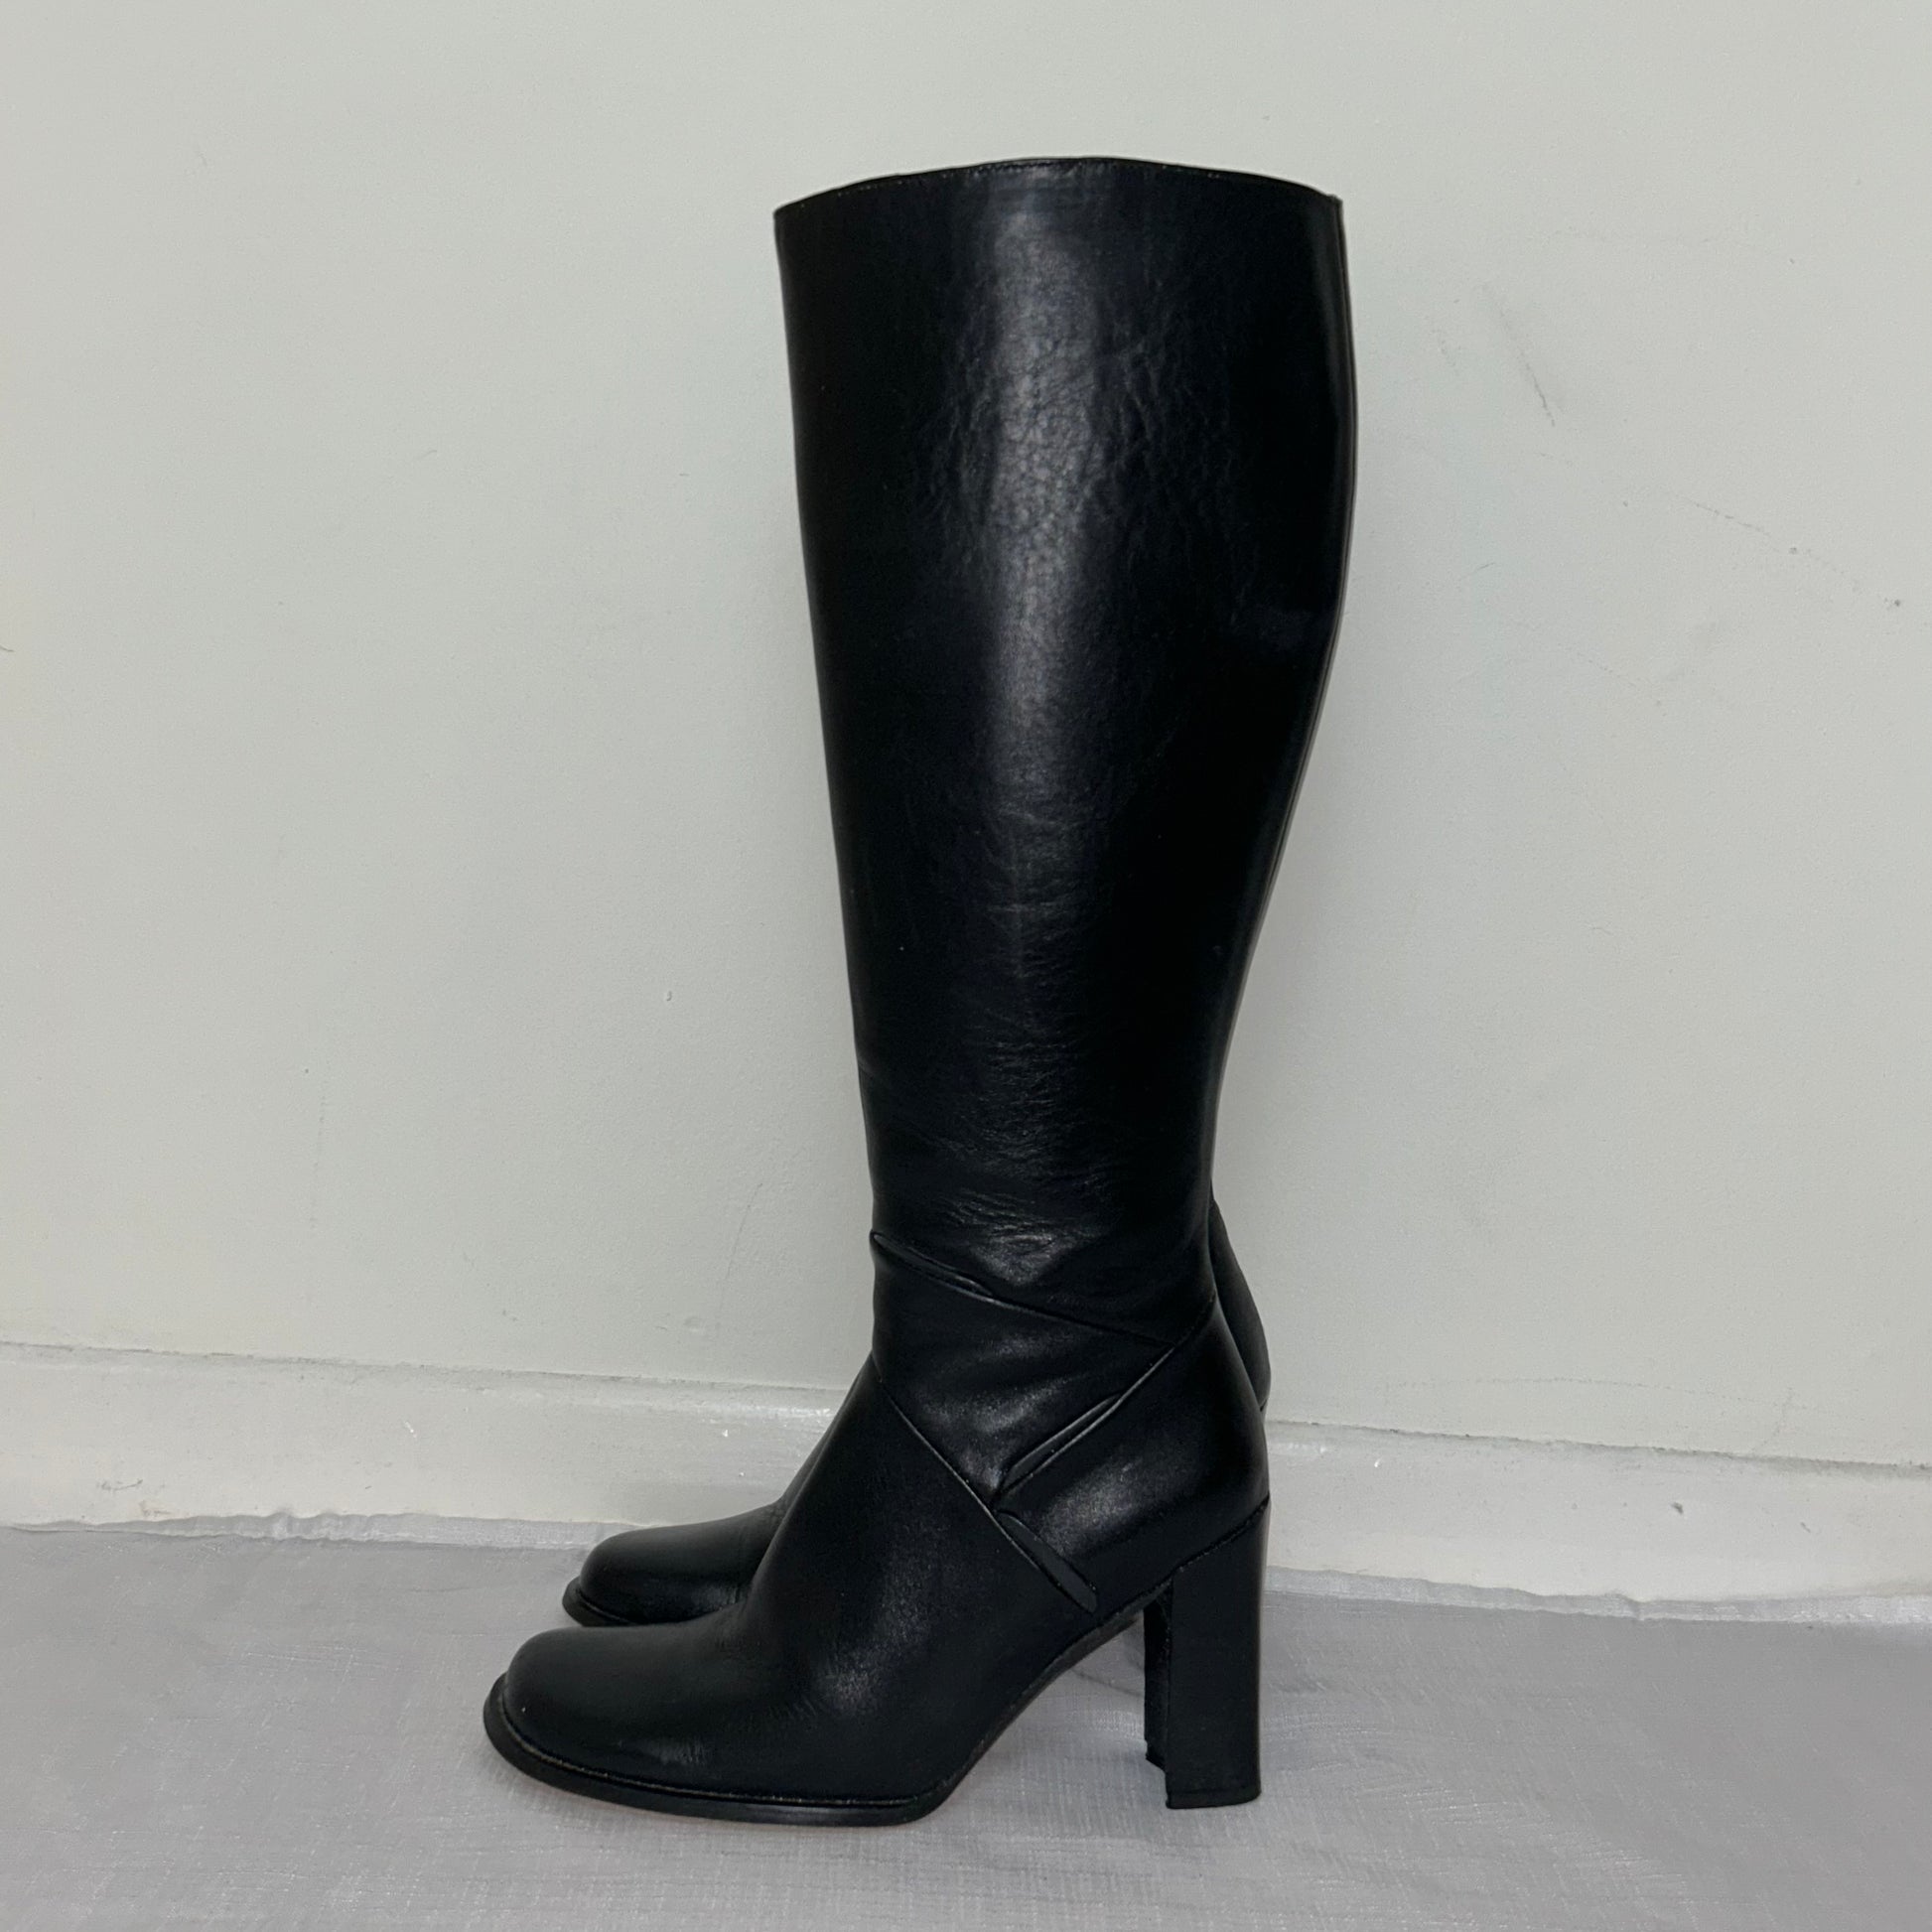 black knee high leather boots shown on a white background